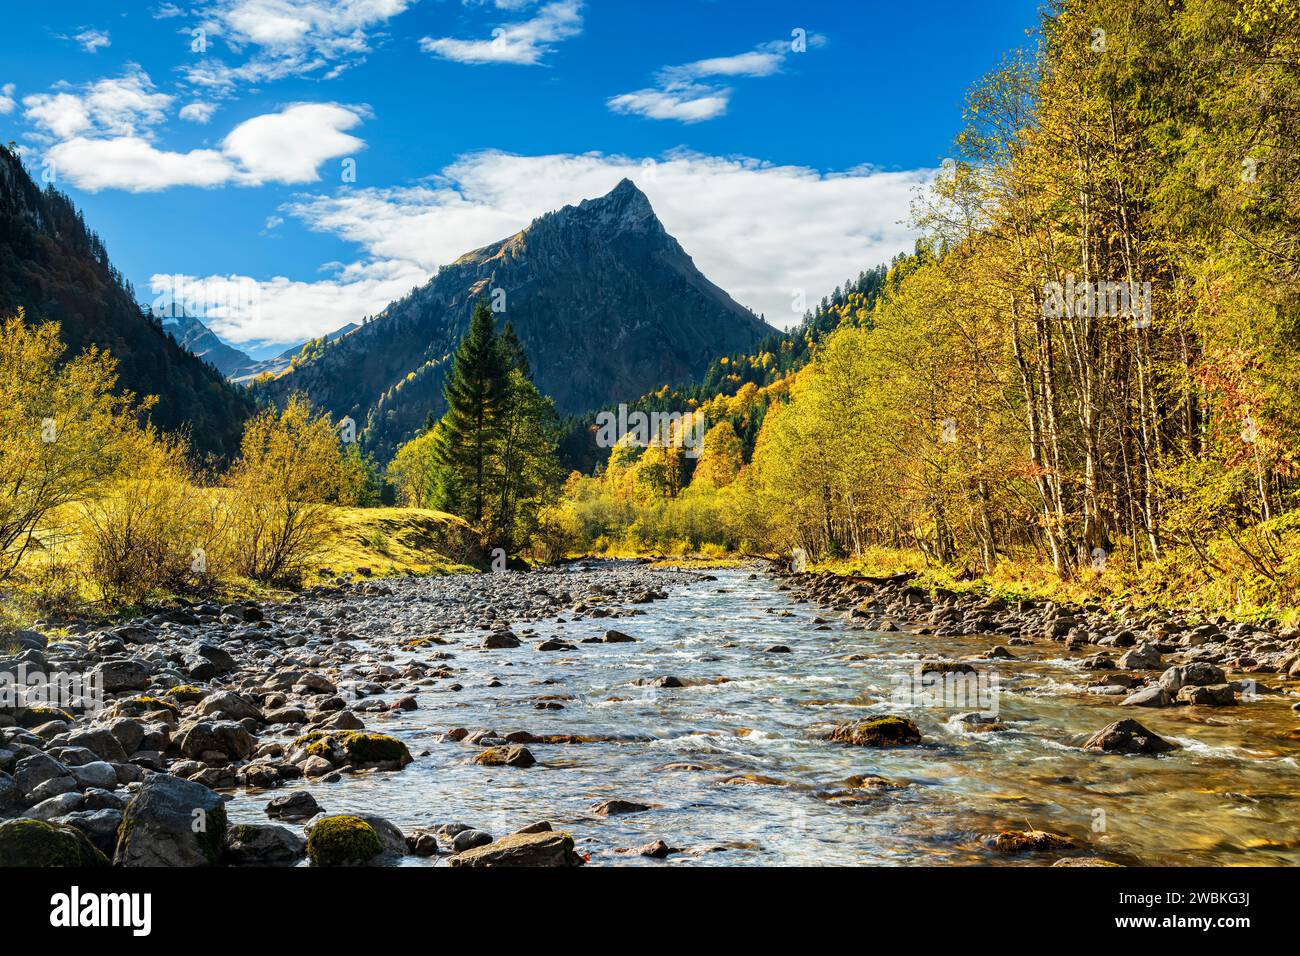 River, mountains and colorful forests in a picturesque mountain landscape in autumn. Ostrach in the Hintersteiner Valley, Allgäu Alps, Bavaria, Germany Stock Photo